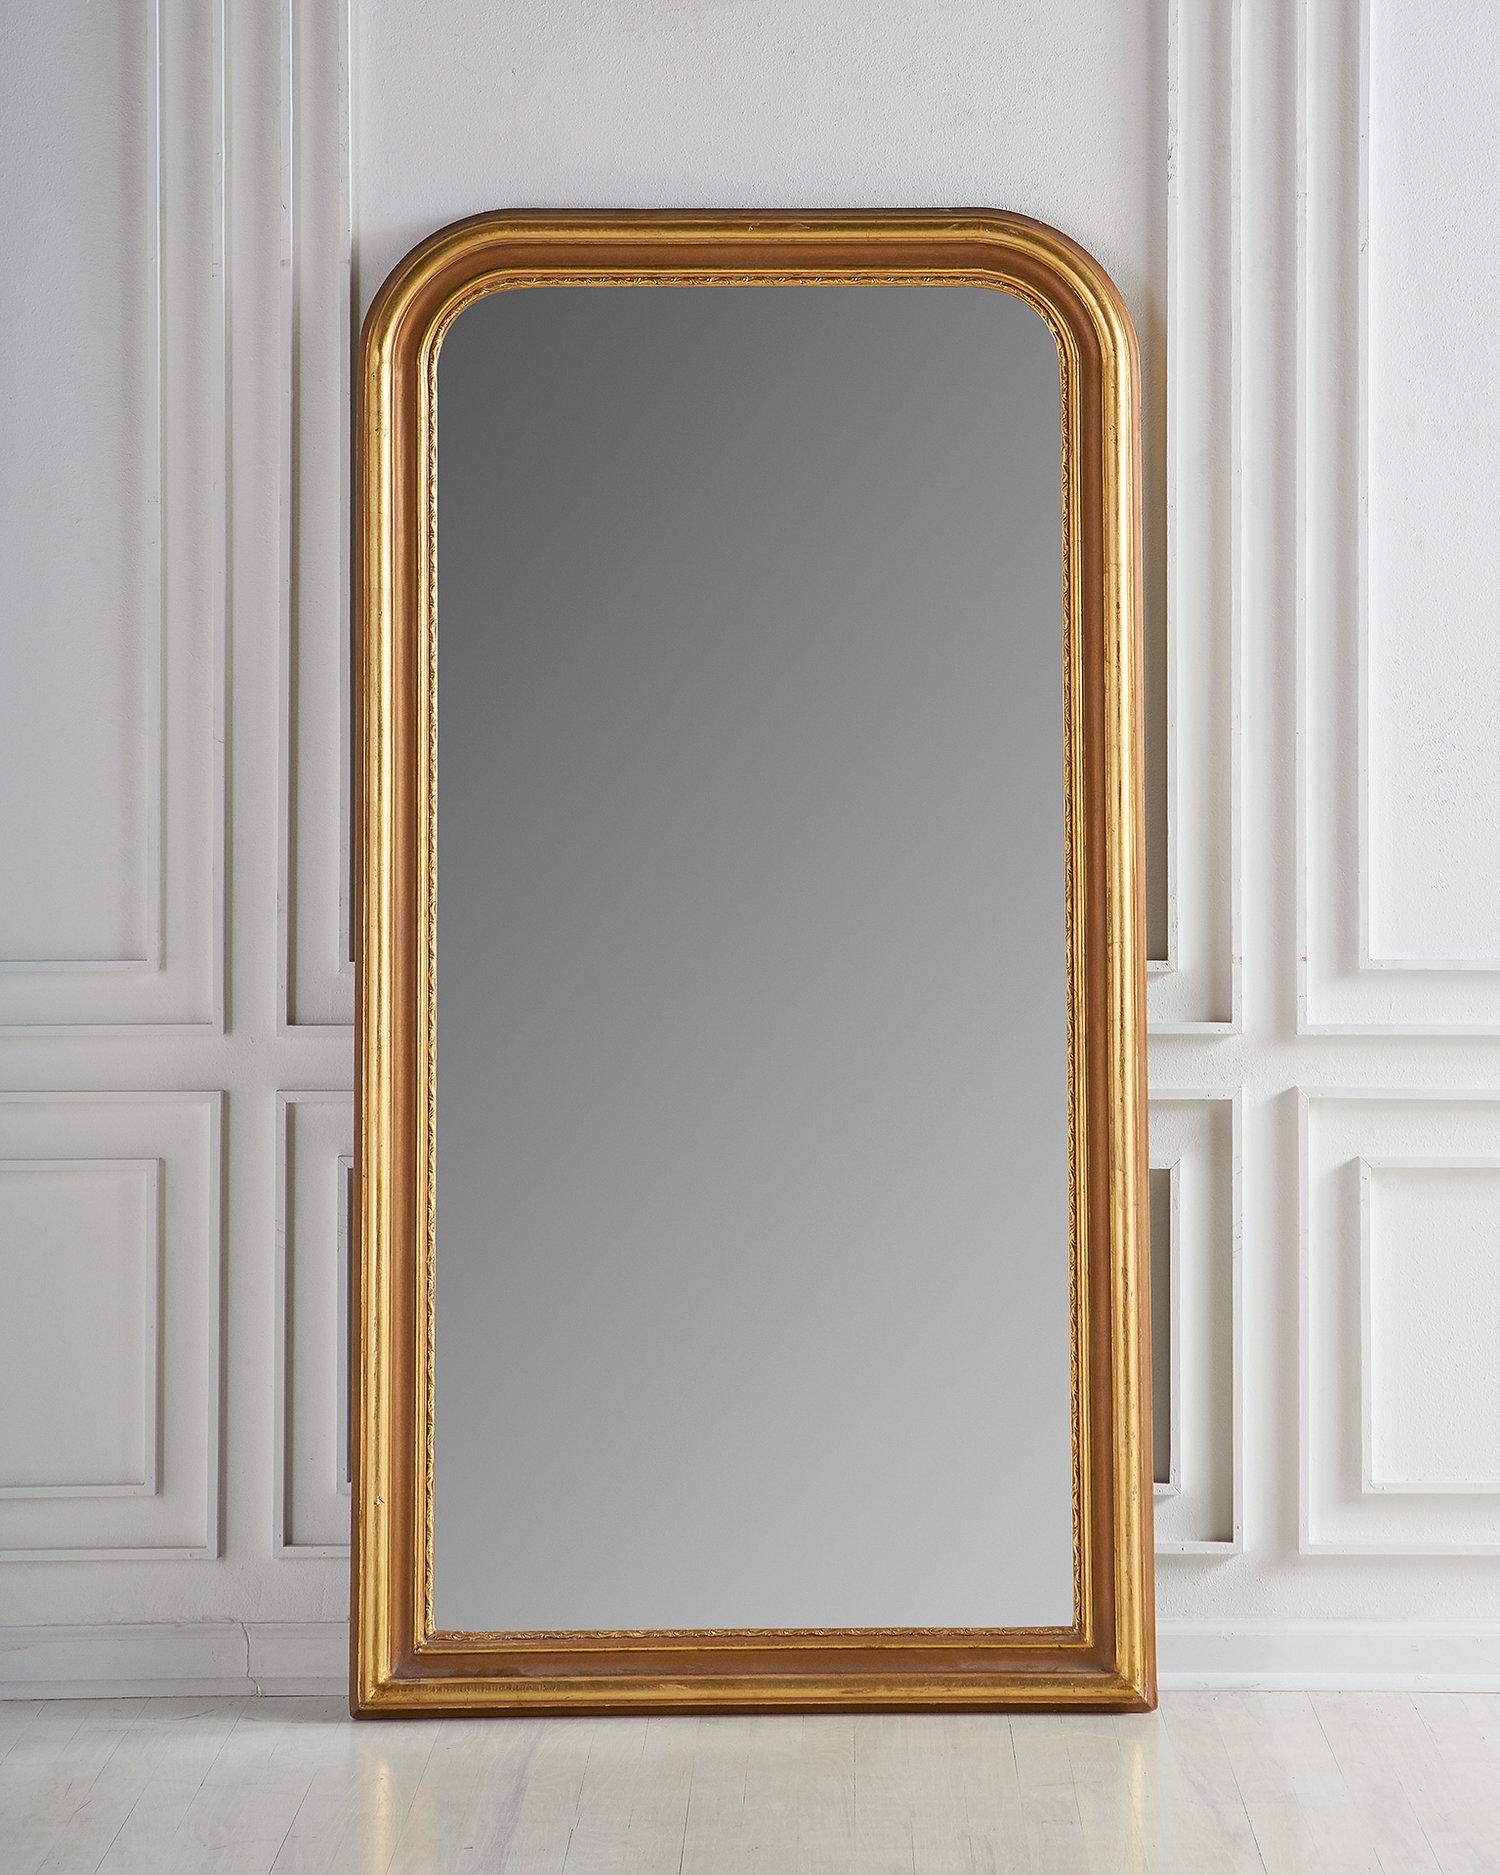 A gorgeous 5’8” foot tall Louis Philippe style mirror made from reclaimed pine and featuring a hand applied gold finish. We searched high and low to source various sizes and shapes in this style as great options for our clients - this size would be